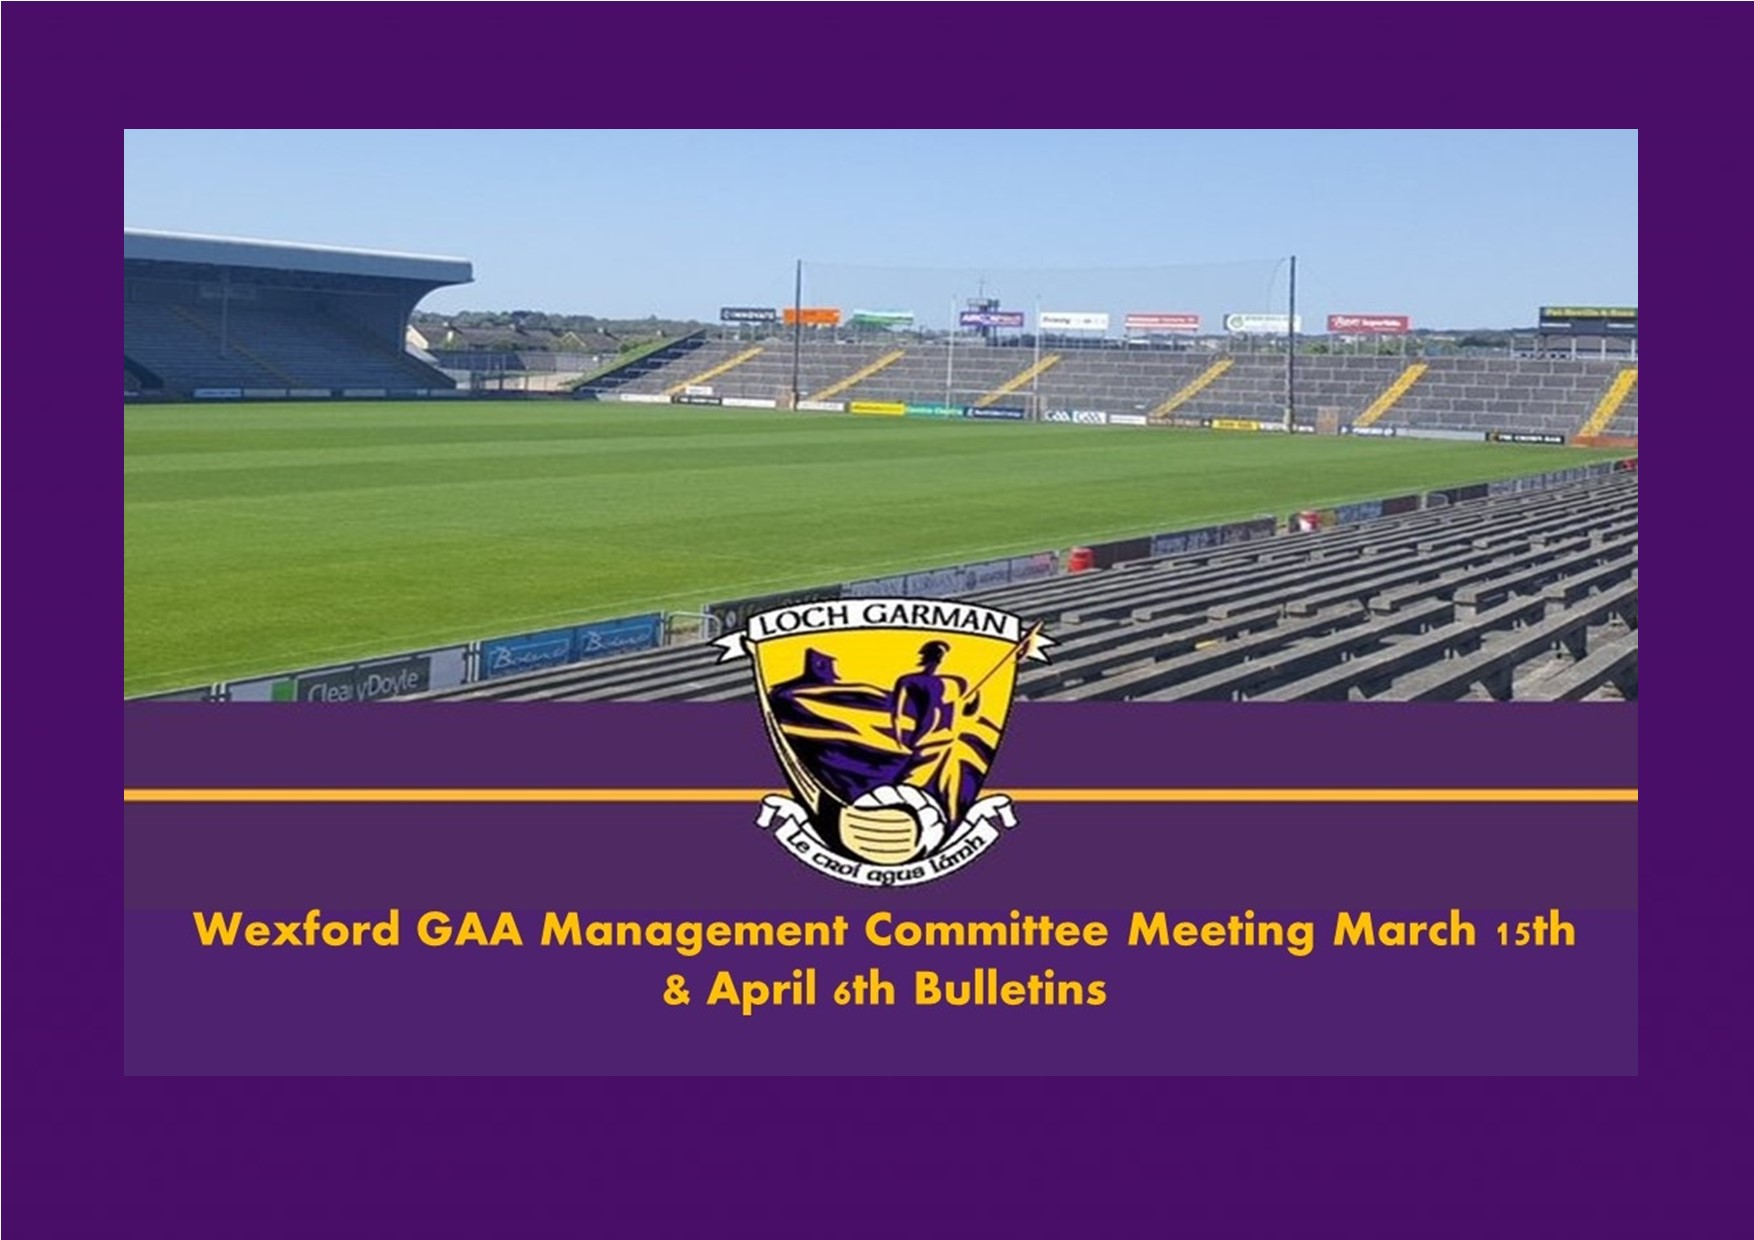 Wexford GAA Management Committee Meeting March 15th & April 6th Bulletins